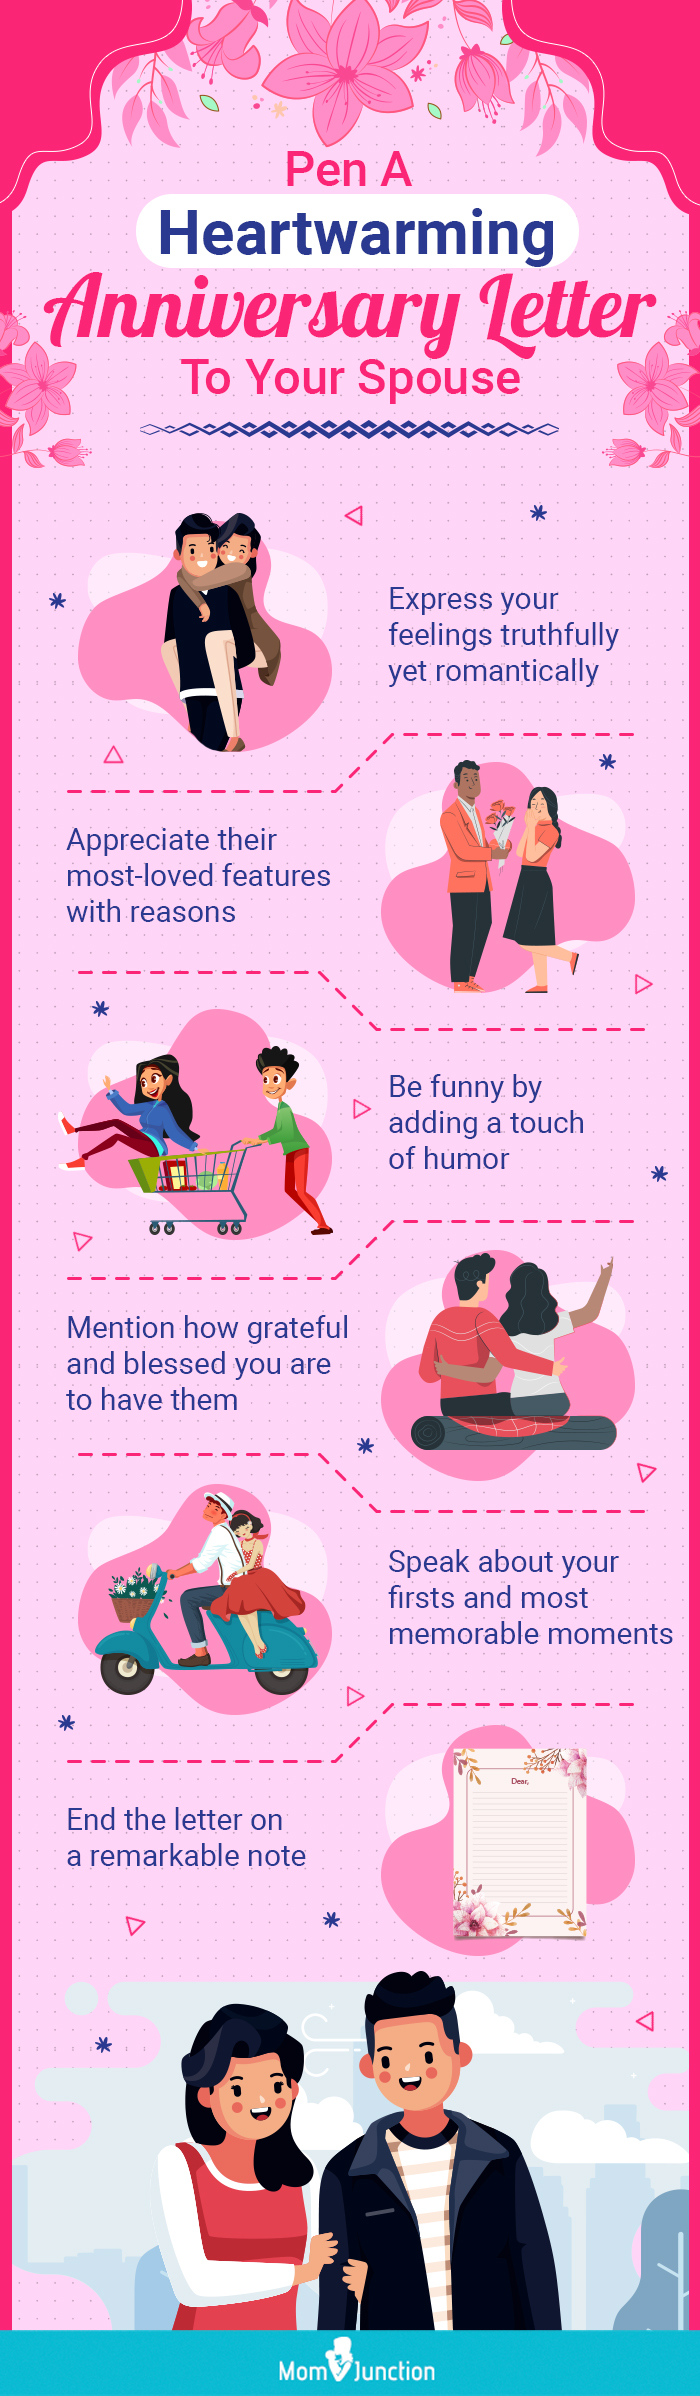 pen a heartwarming anniversary letter to your spouse (infographic)